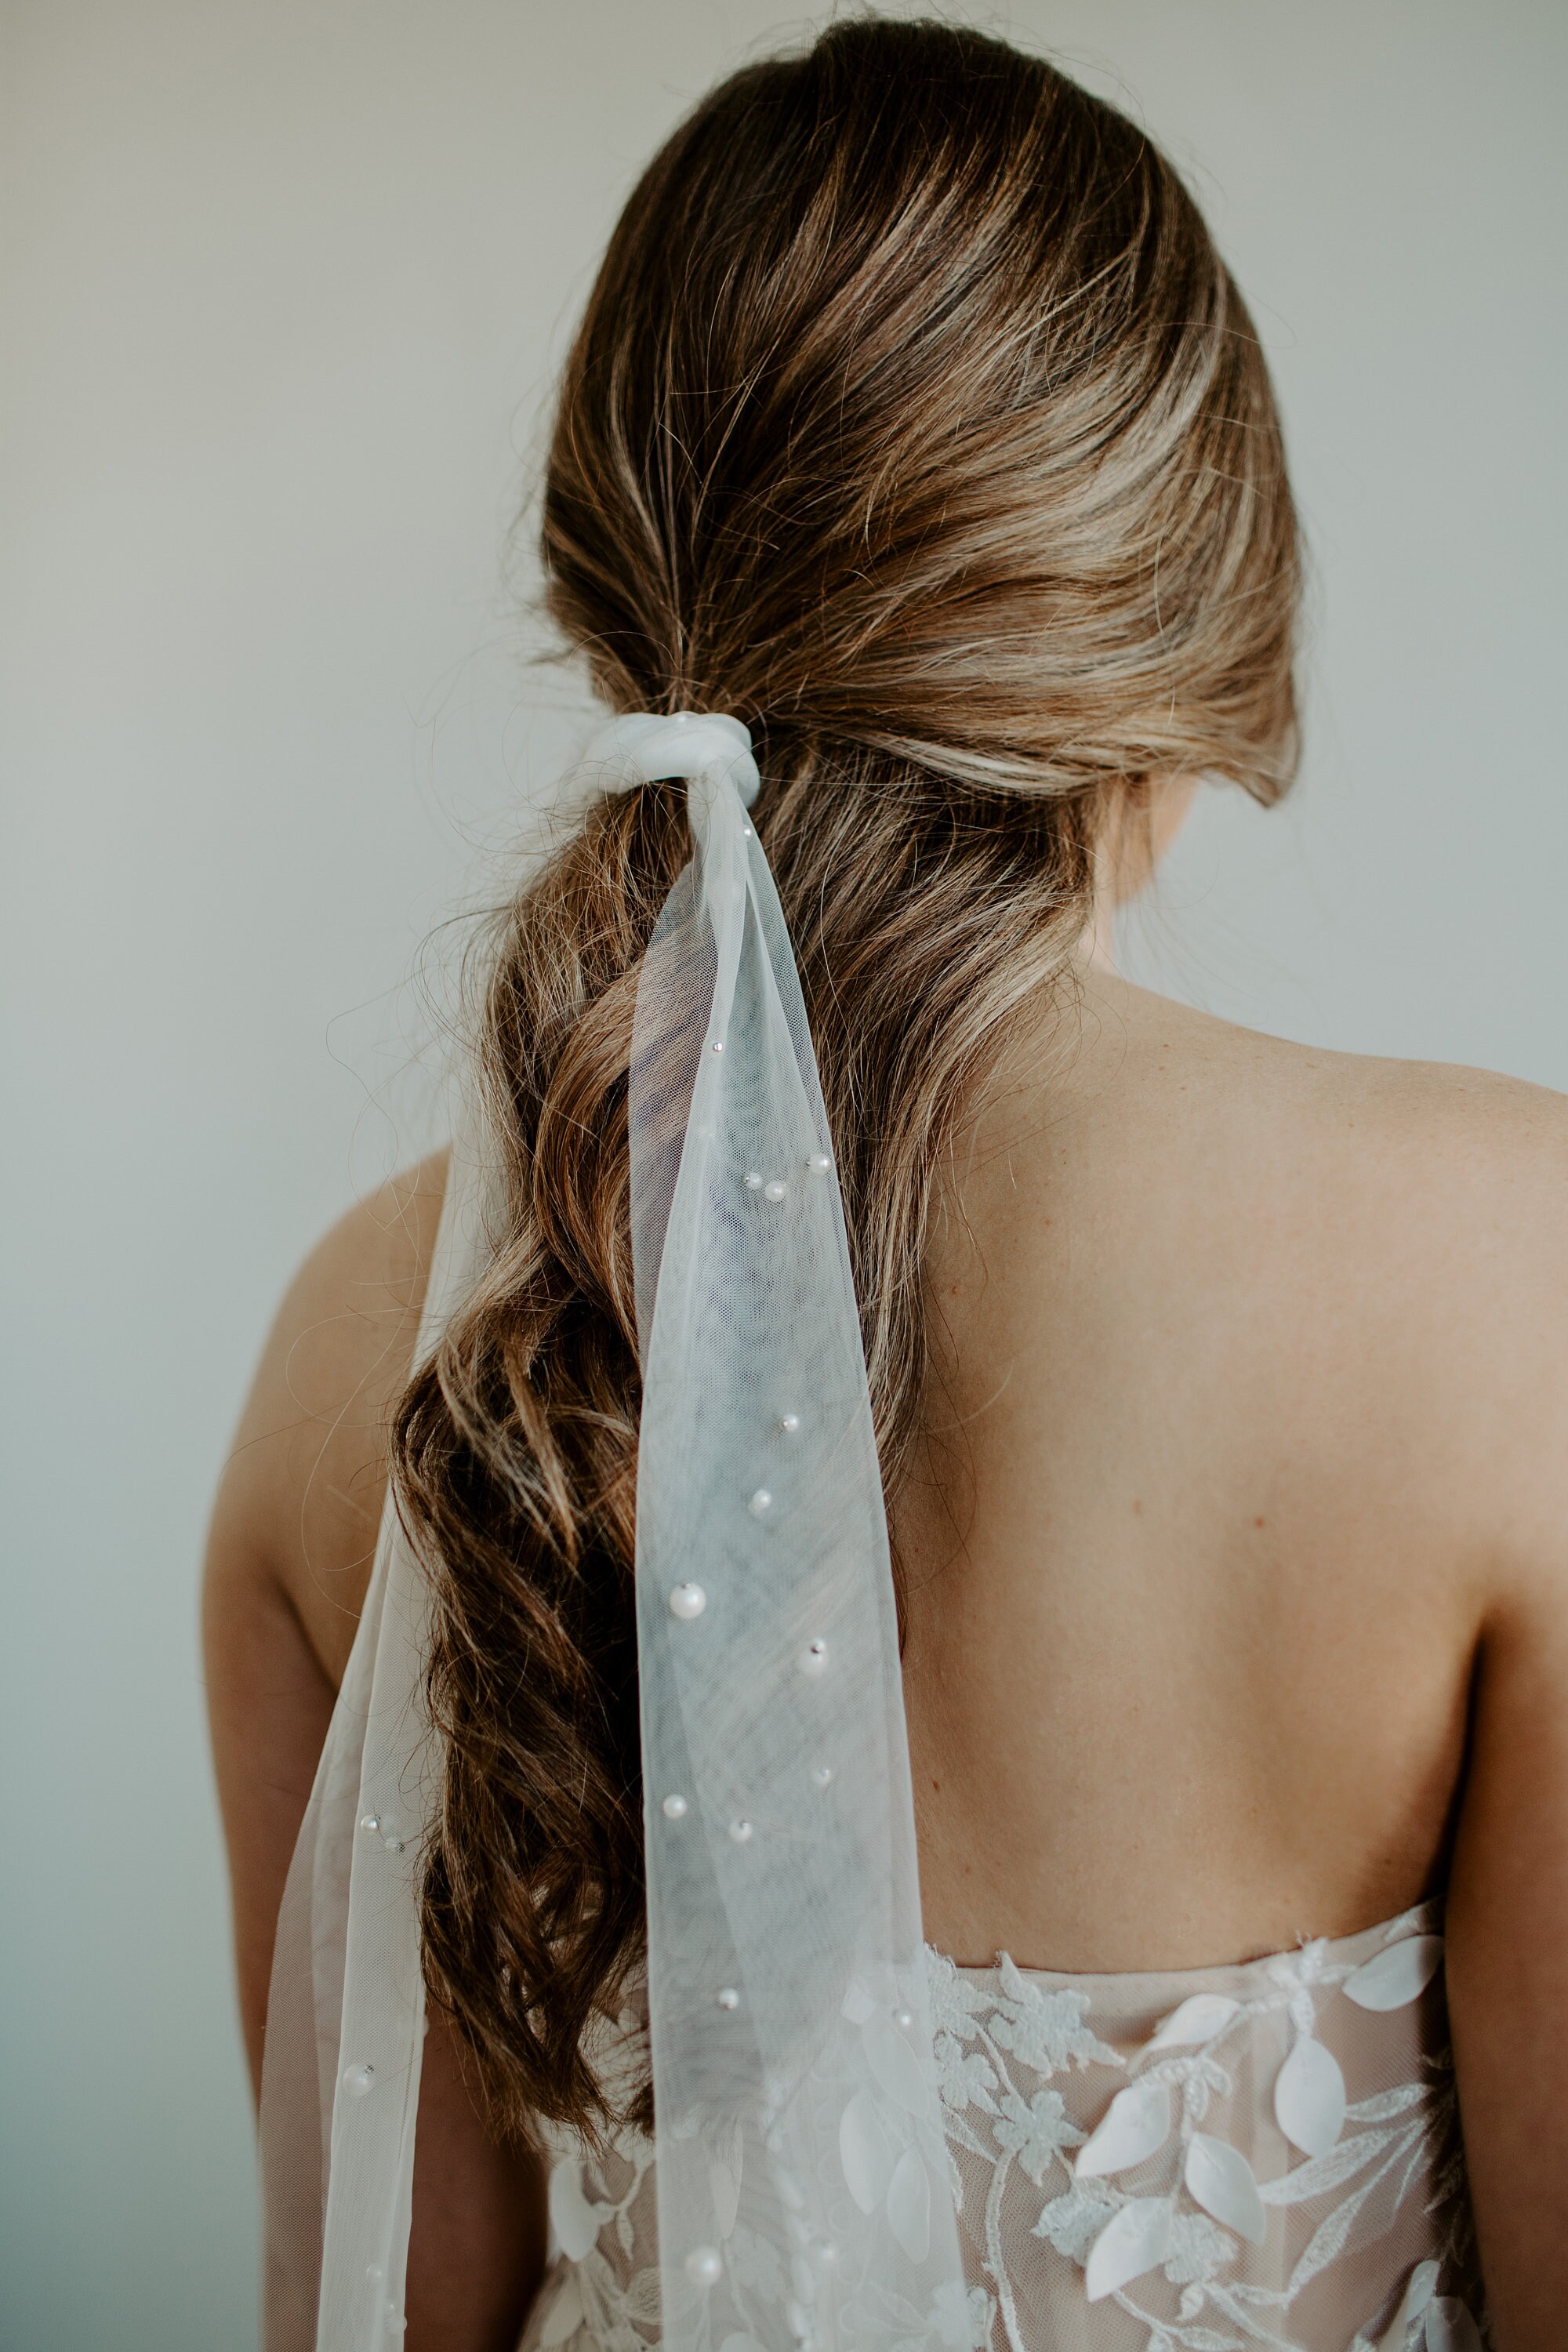 One Blushing Bride Ponytail Wedding Veil Hair Tie with Scattered Pearls, White Ivory White